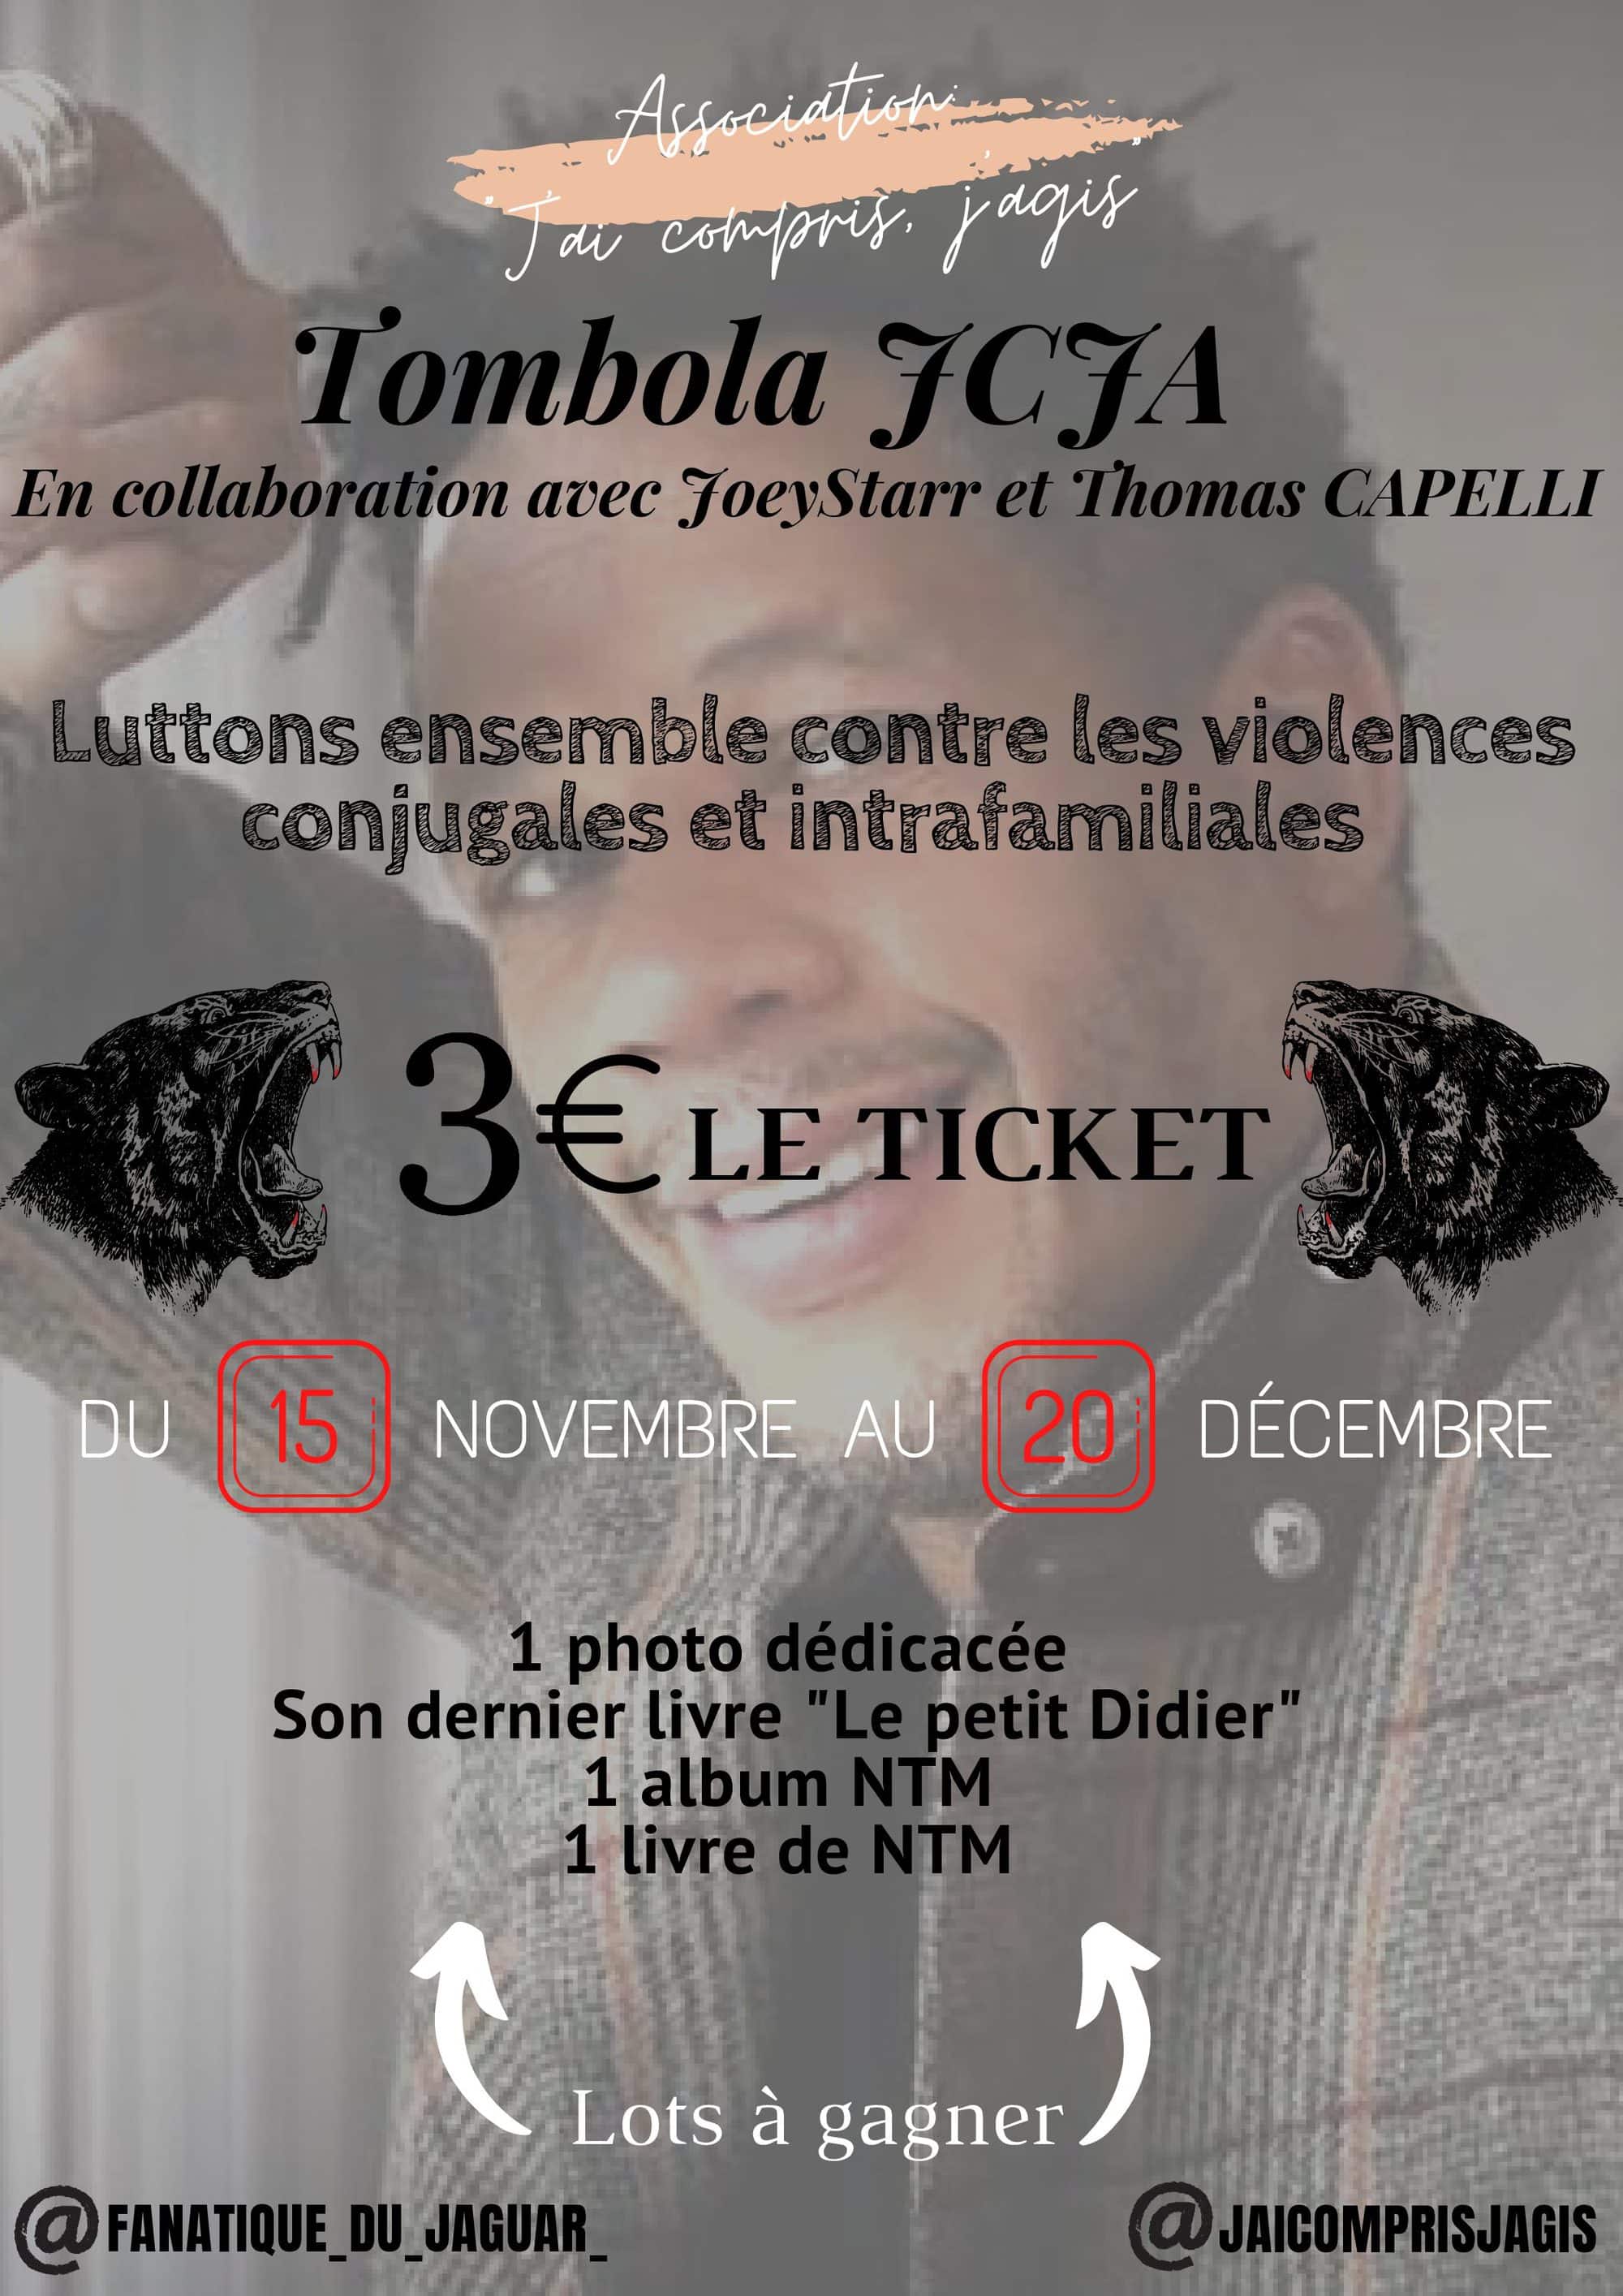 You are currently viewing [🎟️ TOMBOLA JCJA EN COLLABORATION AVEC JOEY STARR 🎟️]